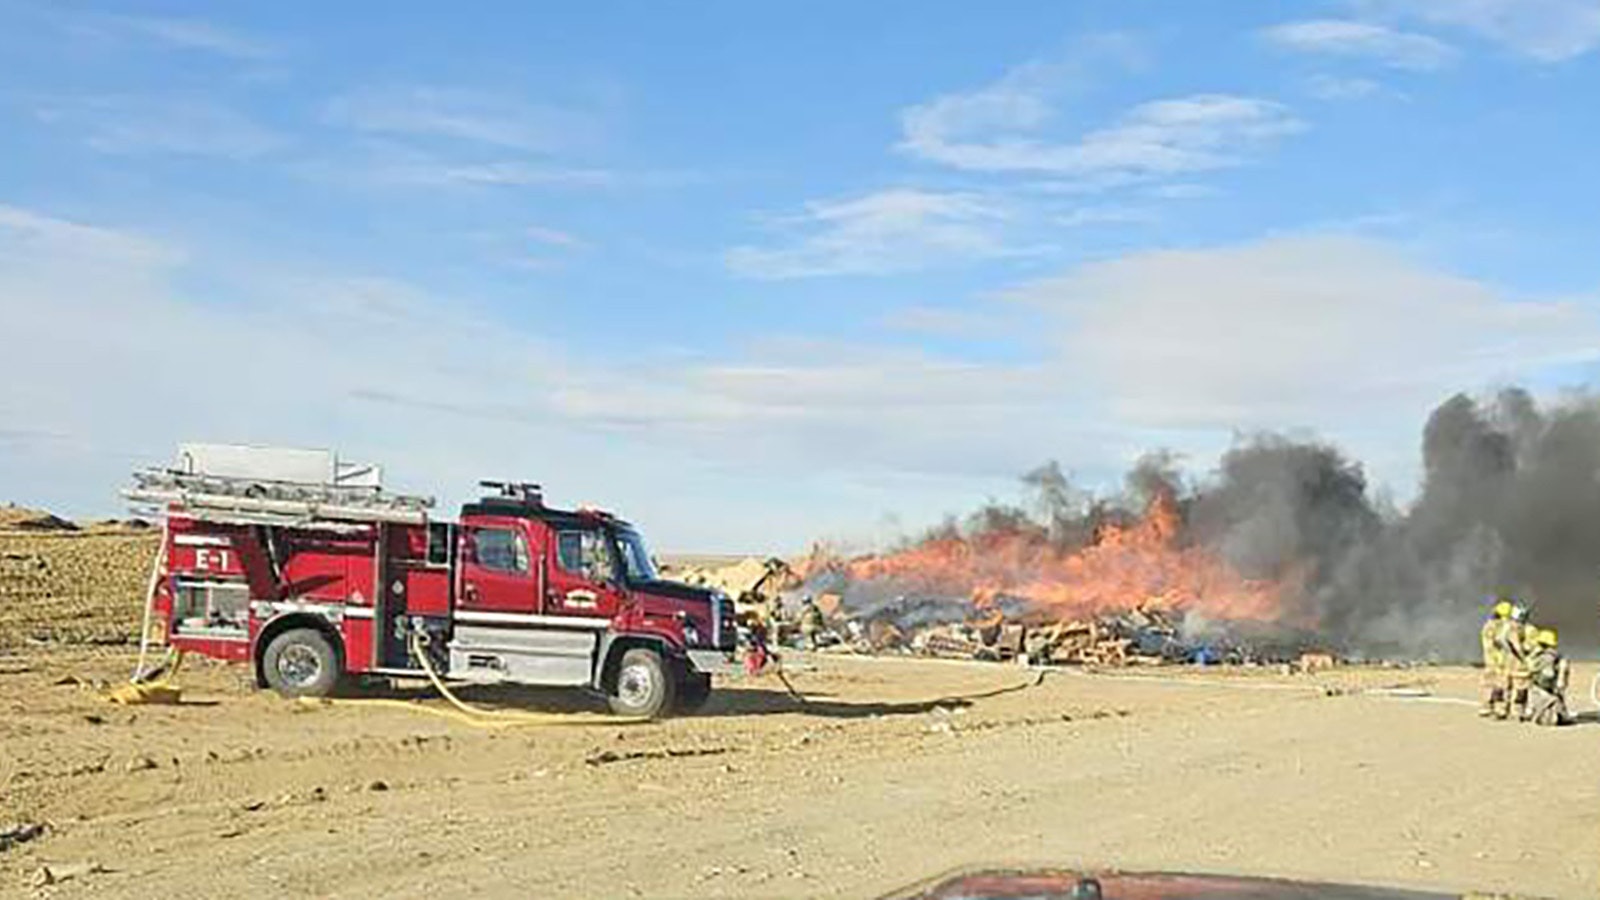 Firefighters work to knock down a large fire that broke out in the construction and demolition section of the Rawlins Landfill on Saturday afternoon.